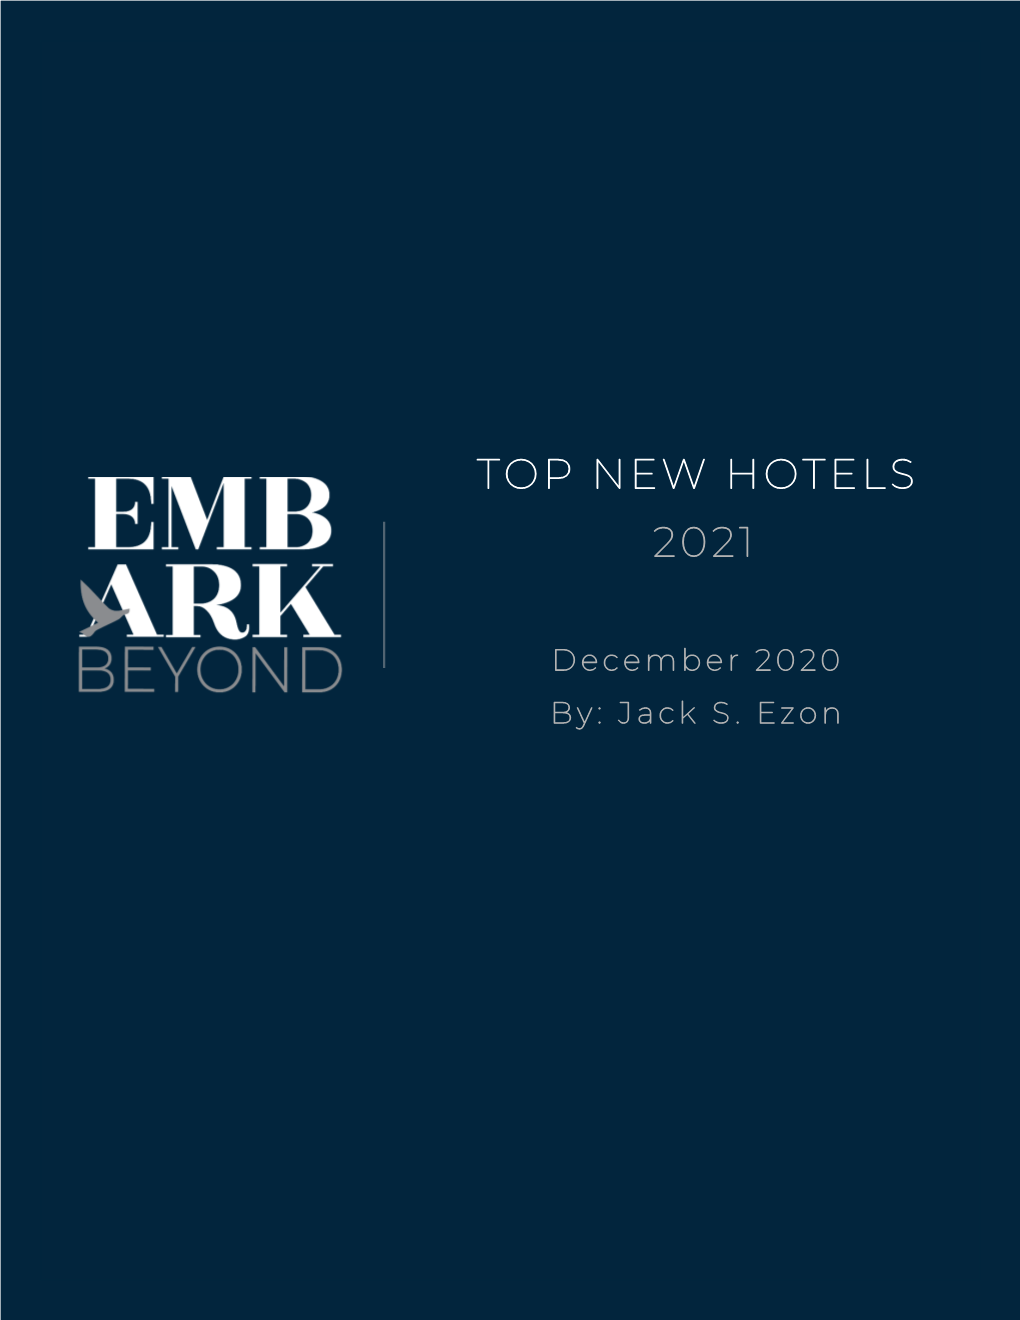 Top New Hotels 2021